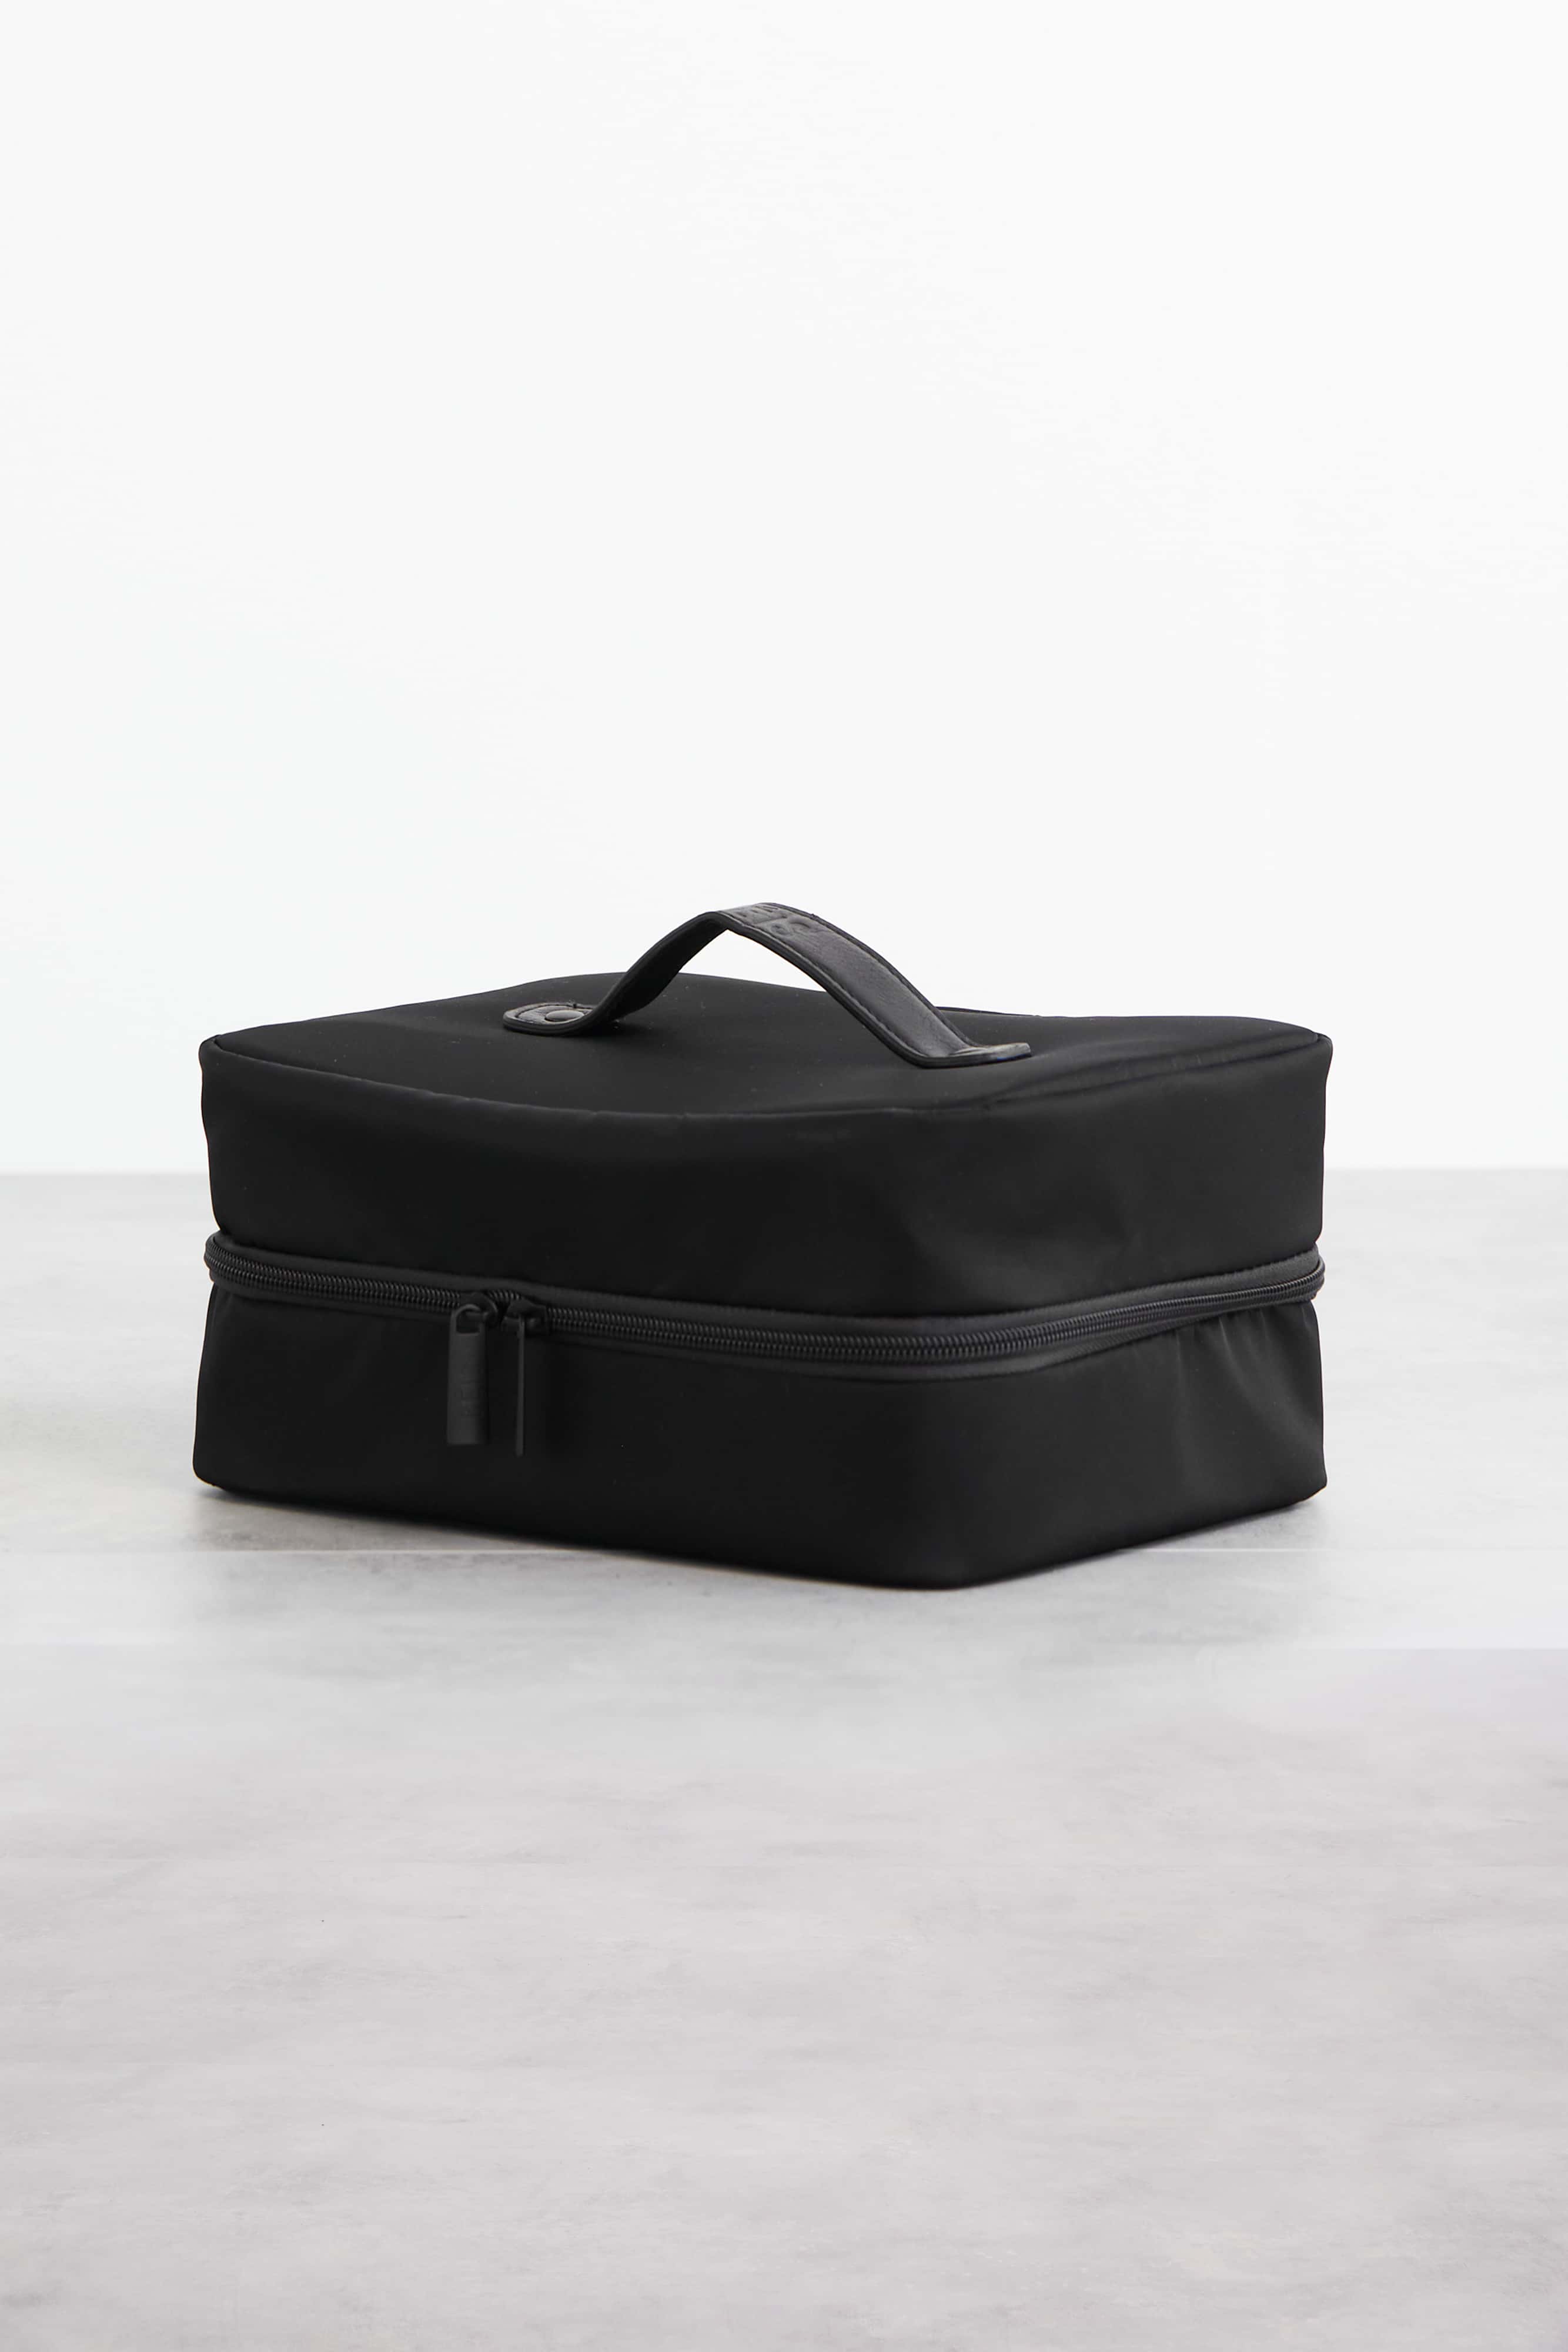 The Hanging Cosmetic Case in Black